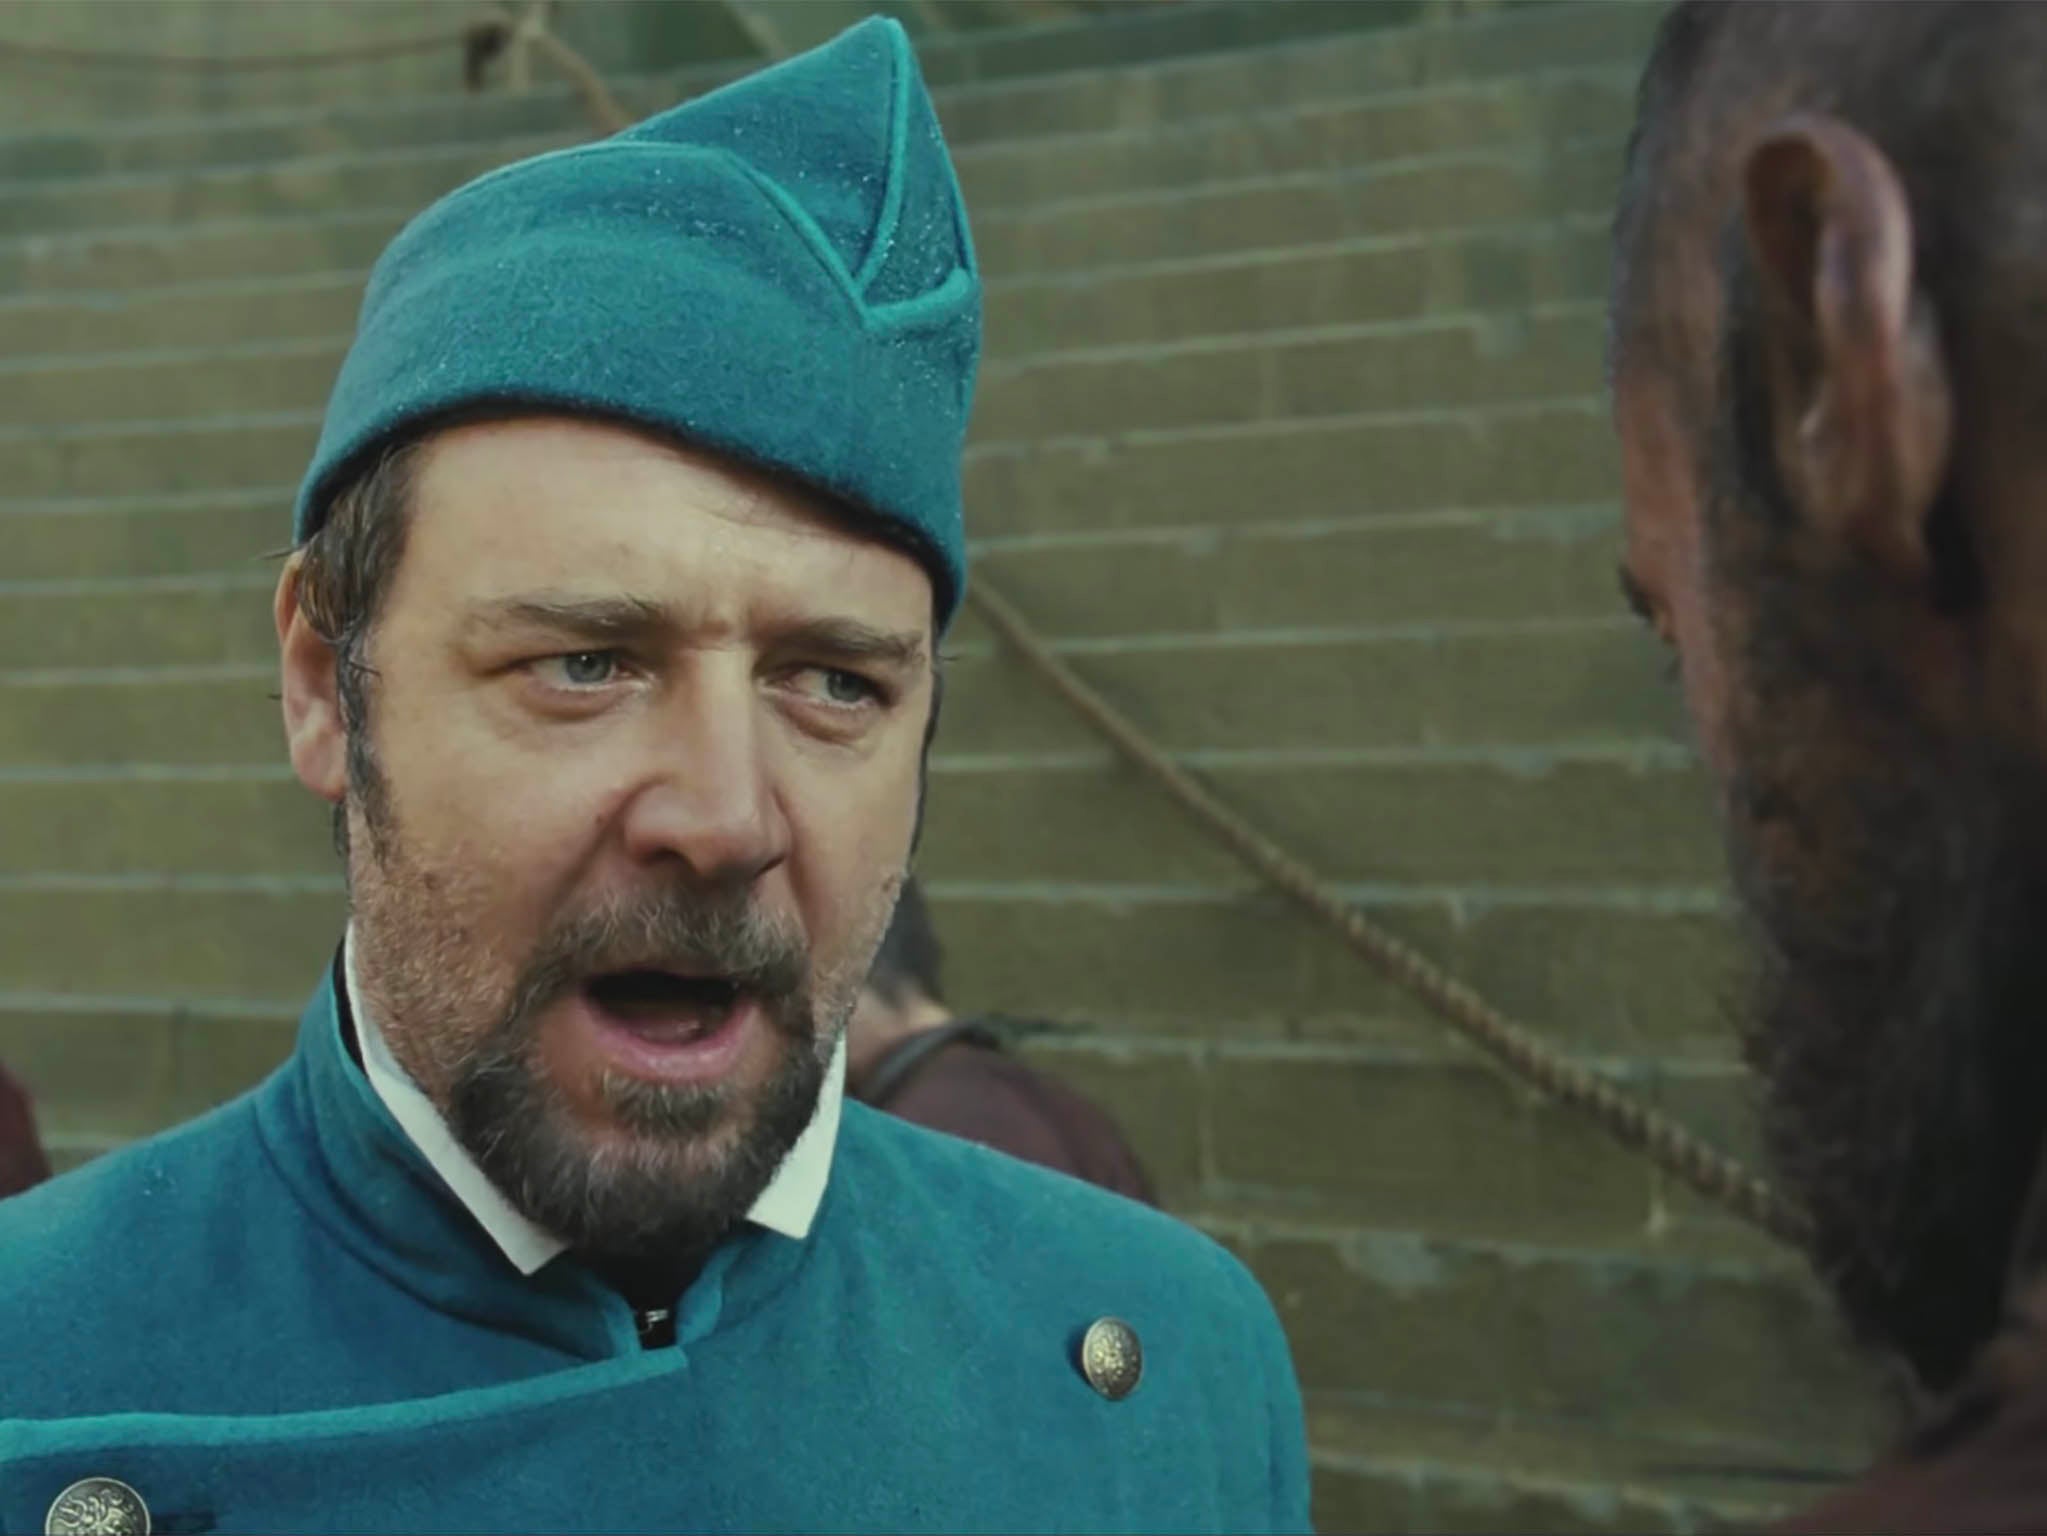 Russell Crowe in ‘Les Miserables'